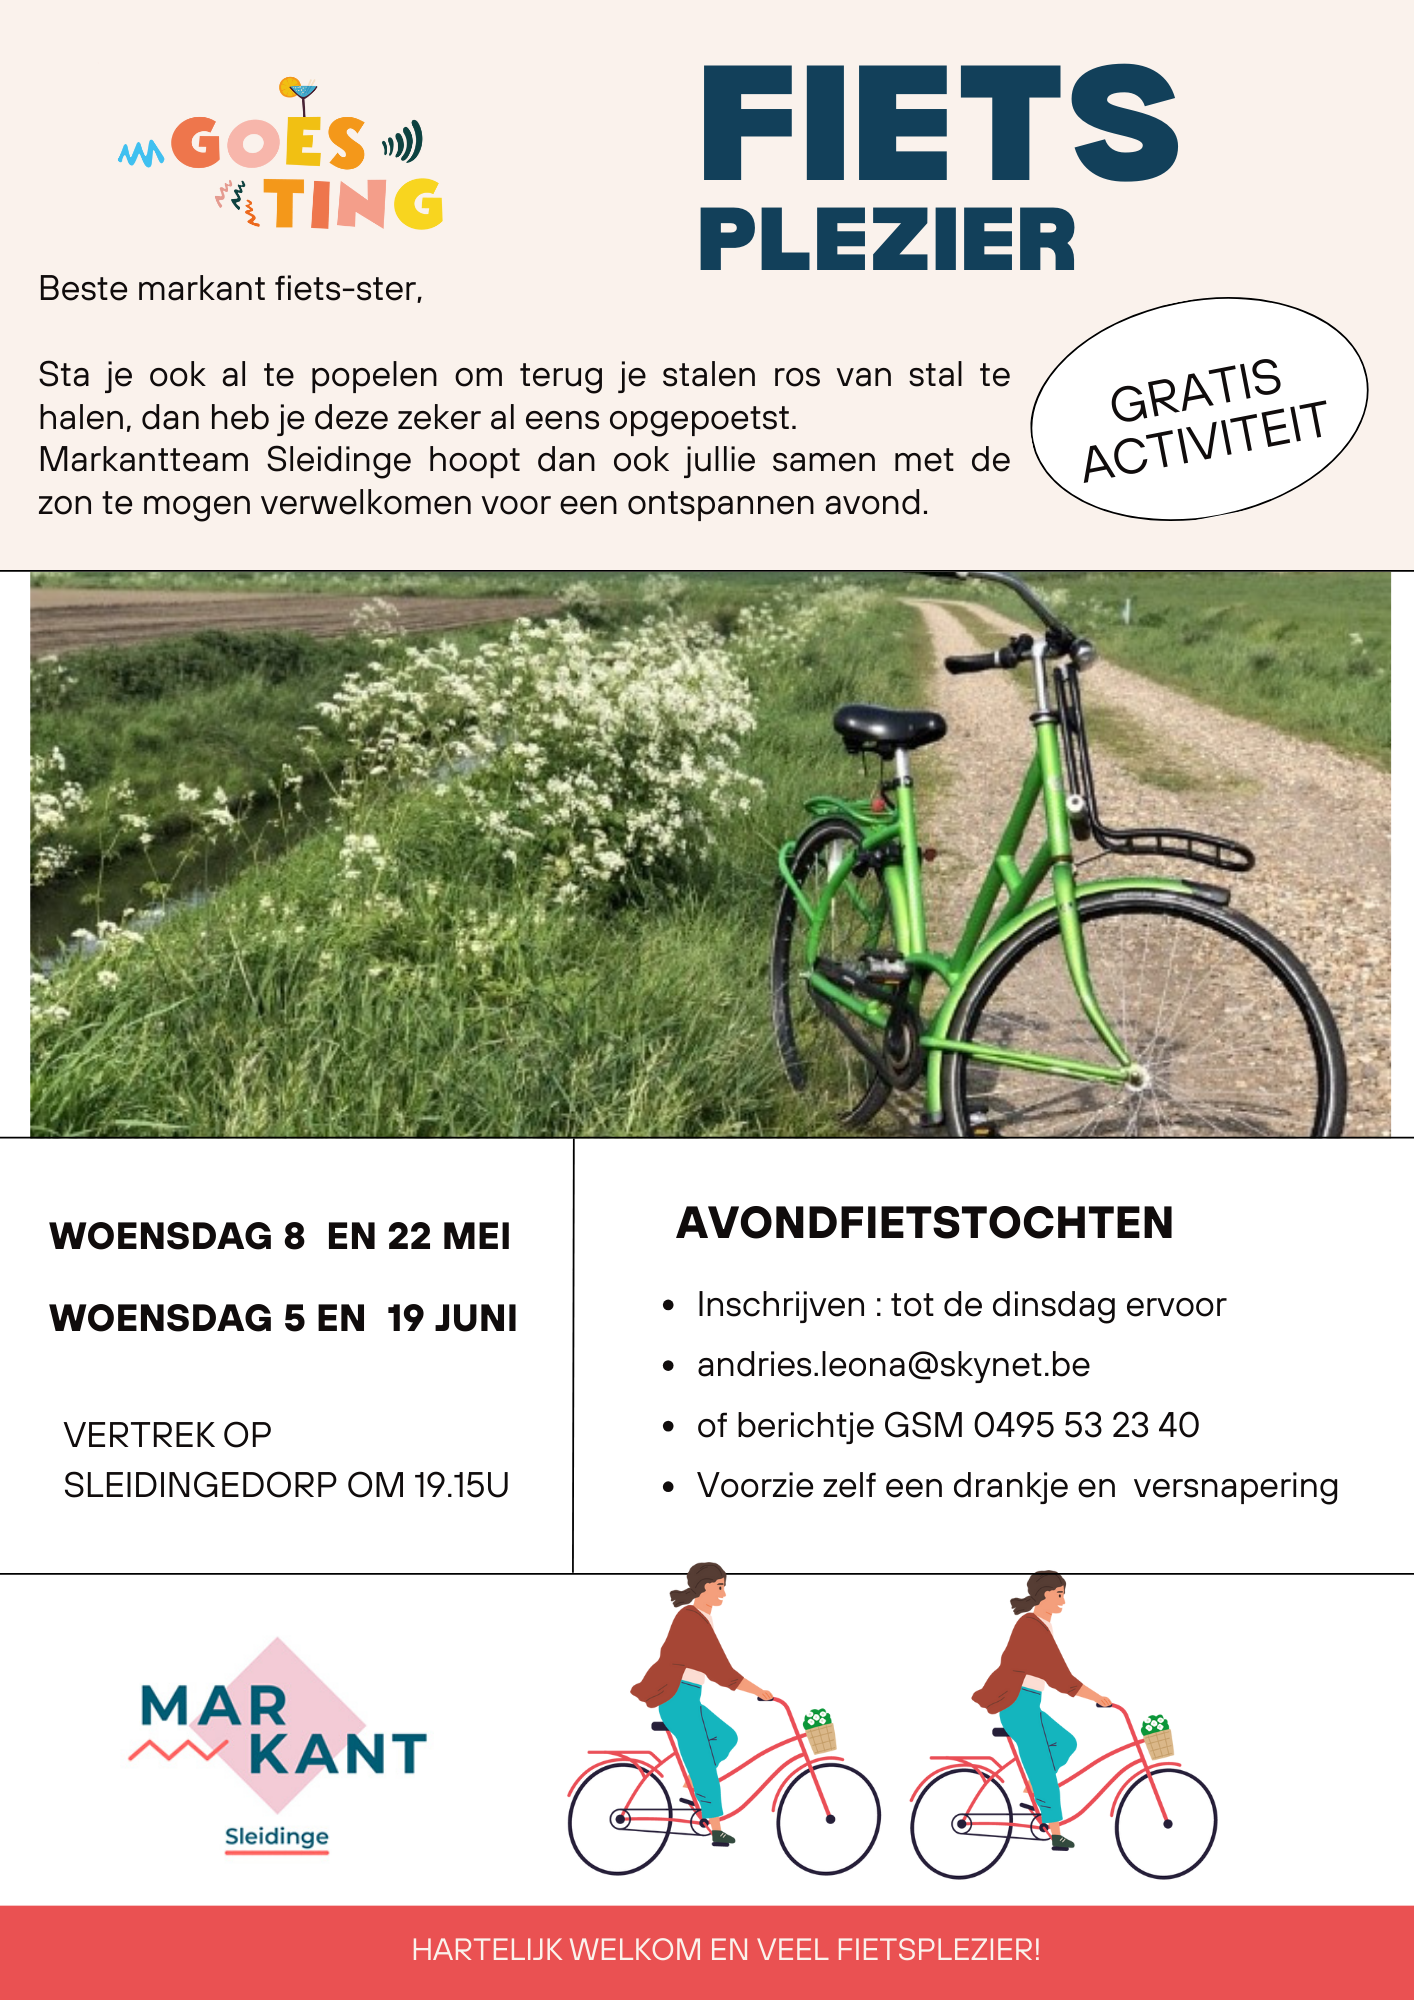 https://madyna.be/storage/activity_photos/66373dd7cf1fd/Markant uitnodiging FIets plezier.png